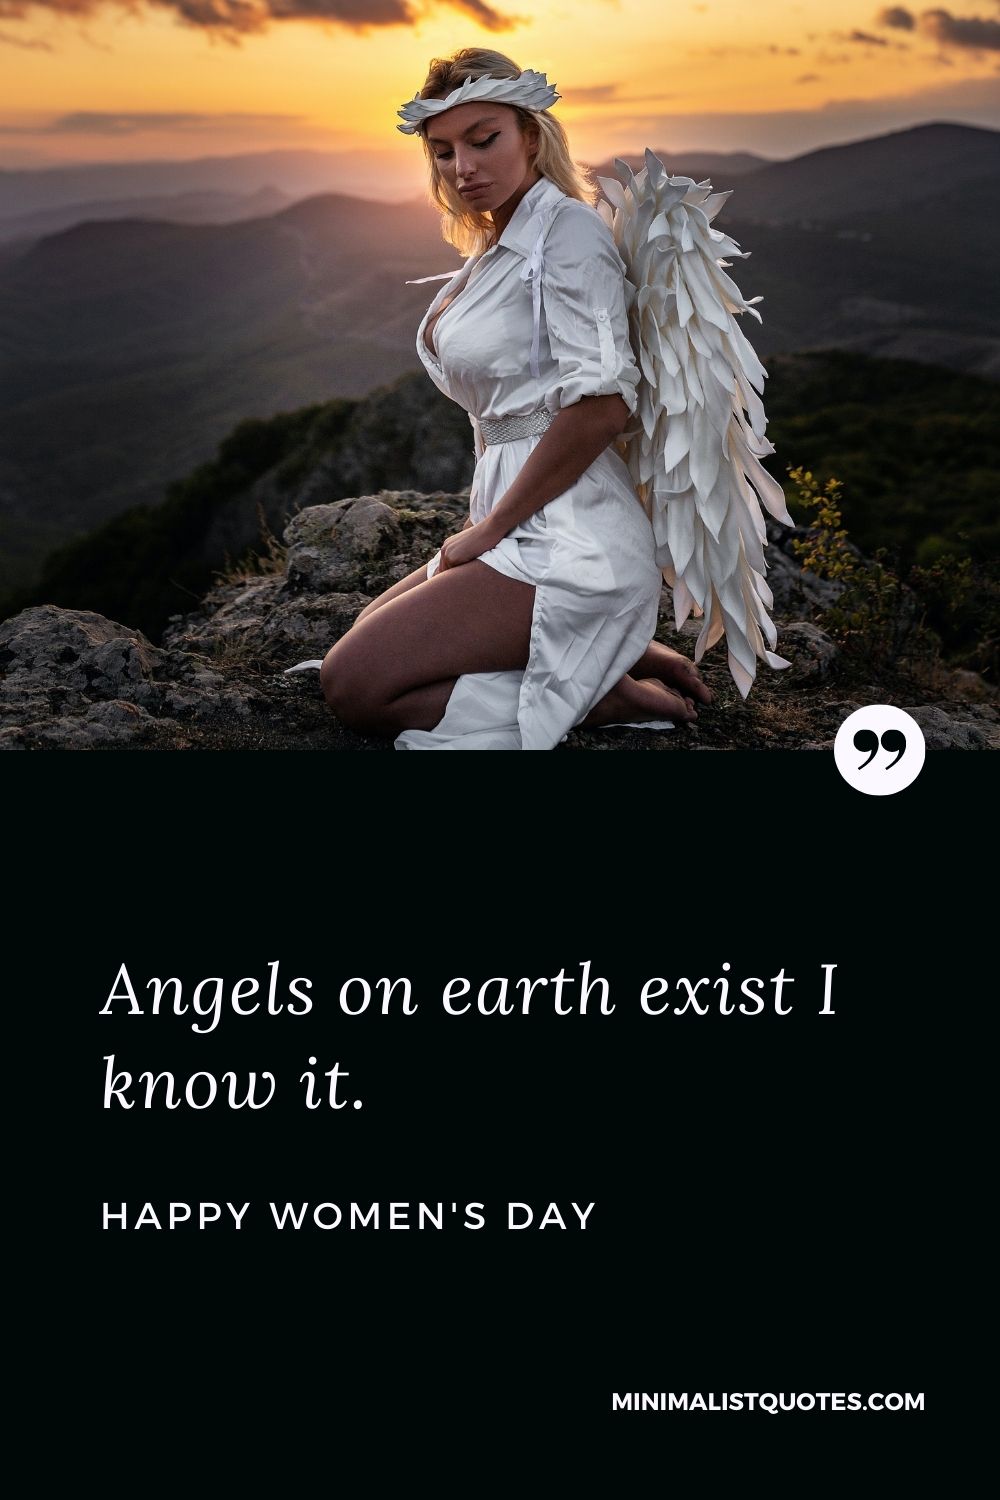 Women's Day wishes, messages & quotes with HD images: Angels on earth exist I know it. Happy Women's Day!